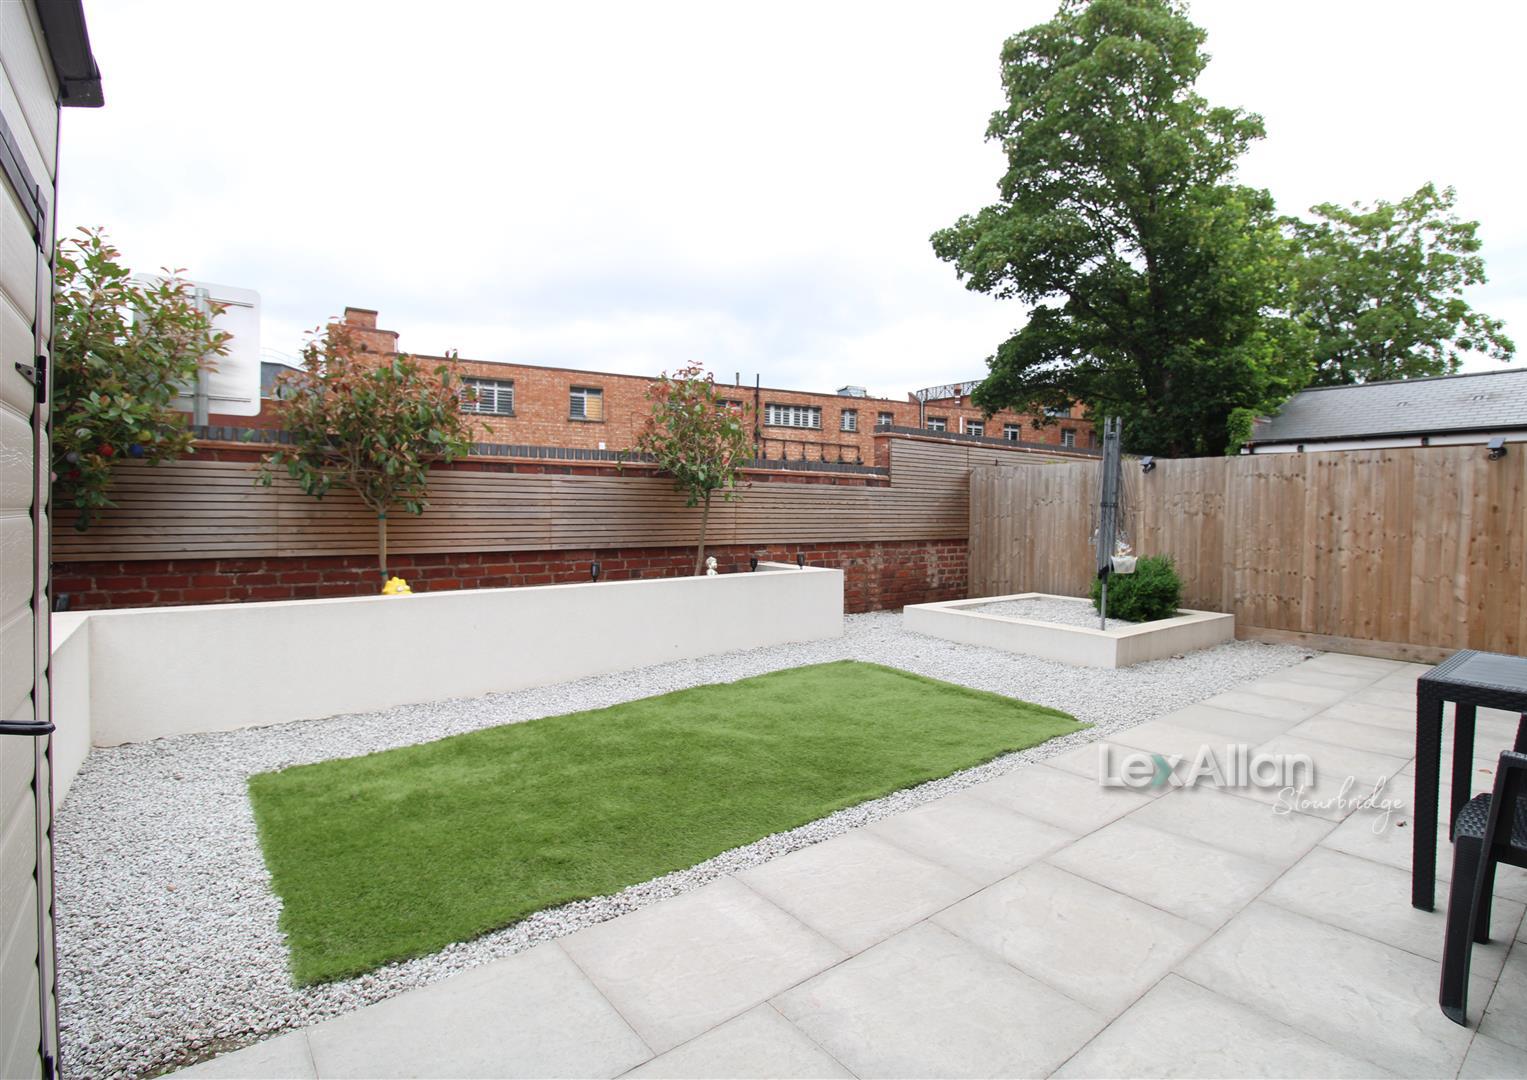 1 bed apartment for sale in Victoria Street, Stourbridge - Property Image 1